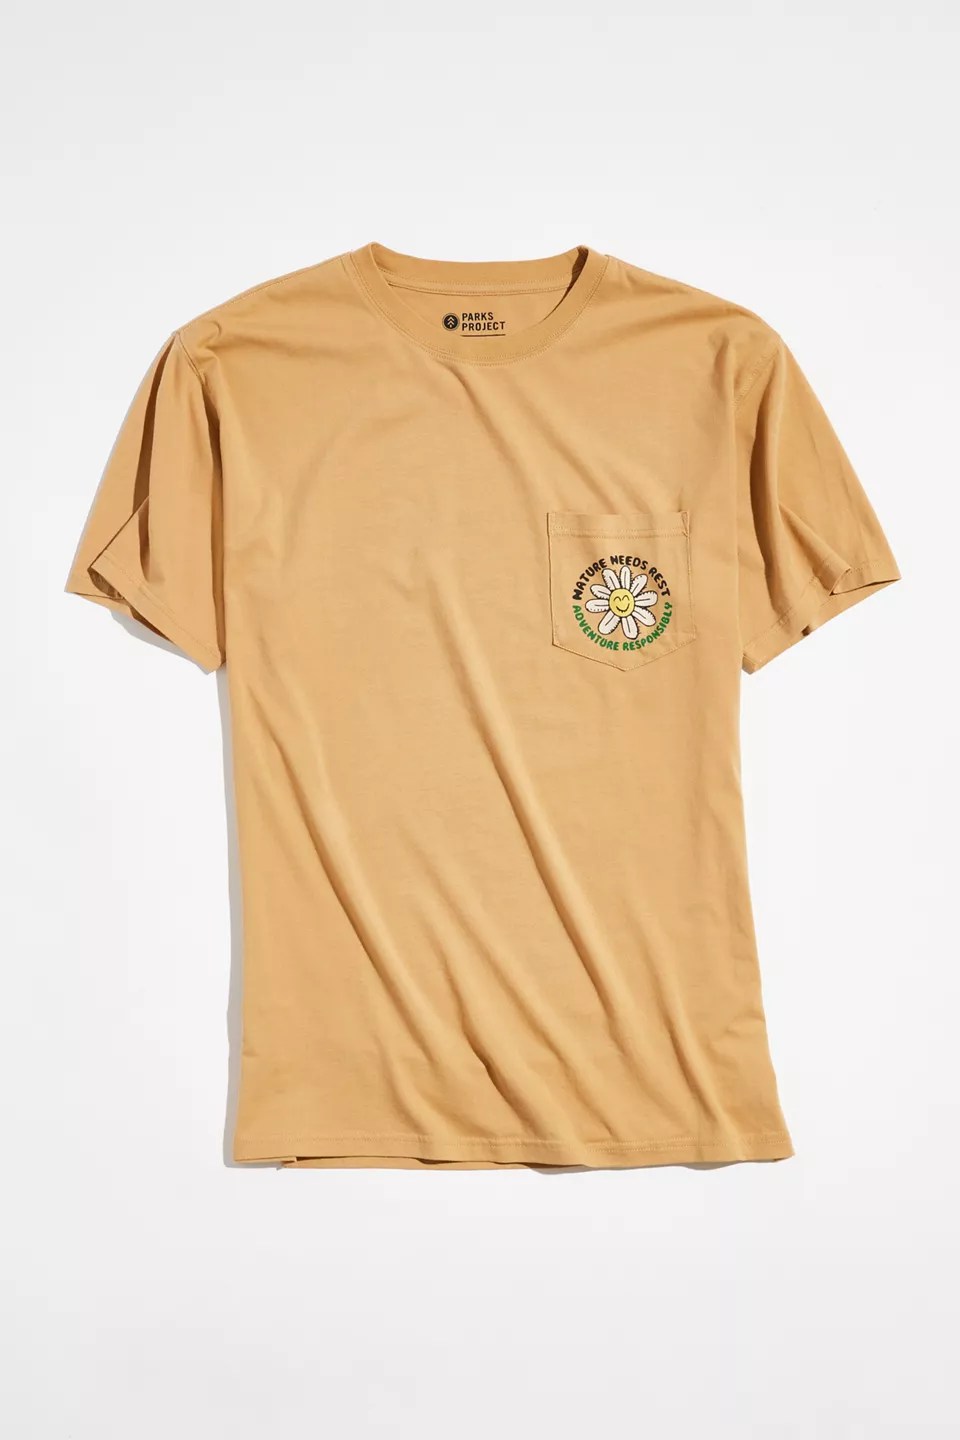 parks project graphic t-shirt, one of the best gifts for teen boys